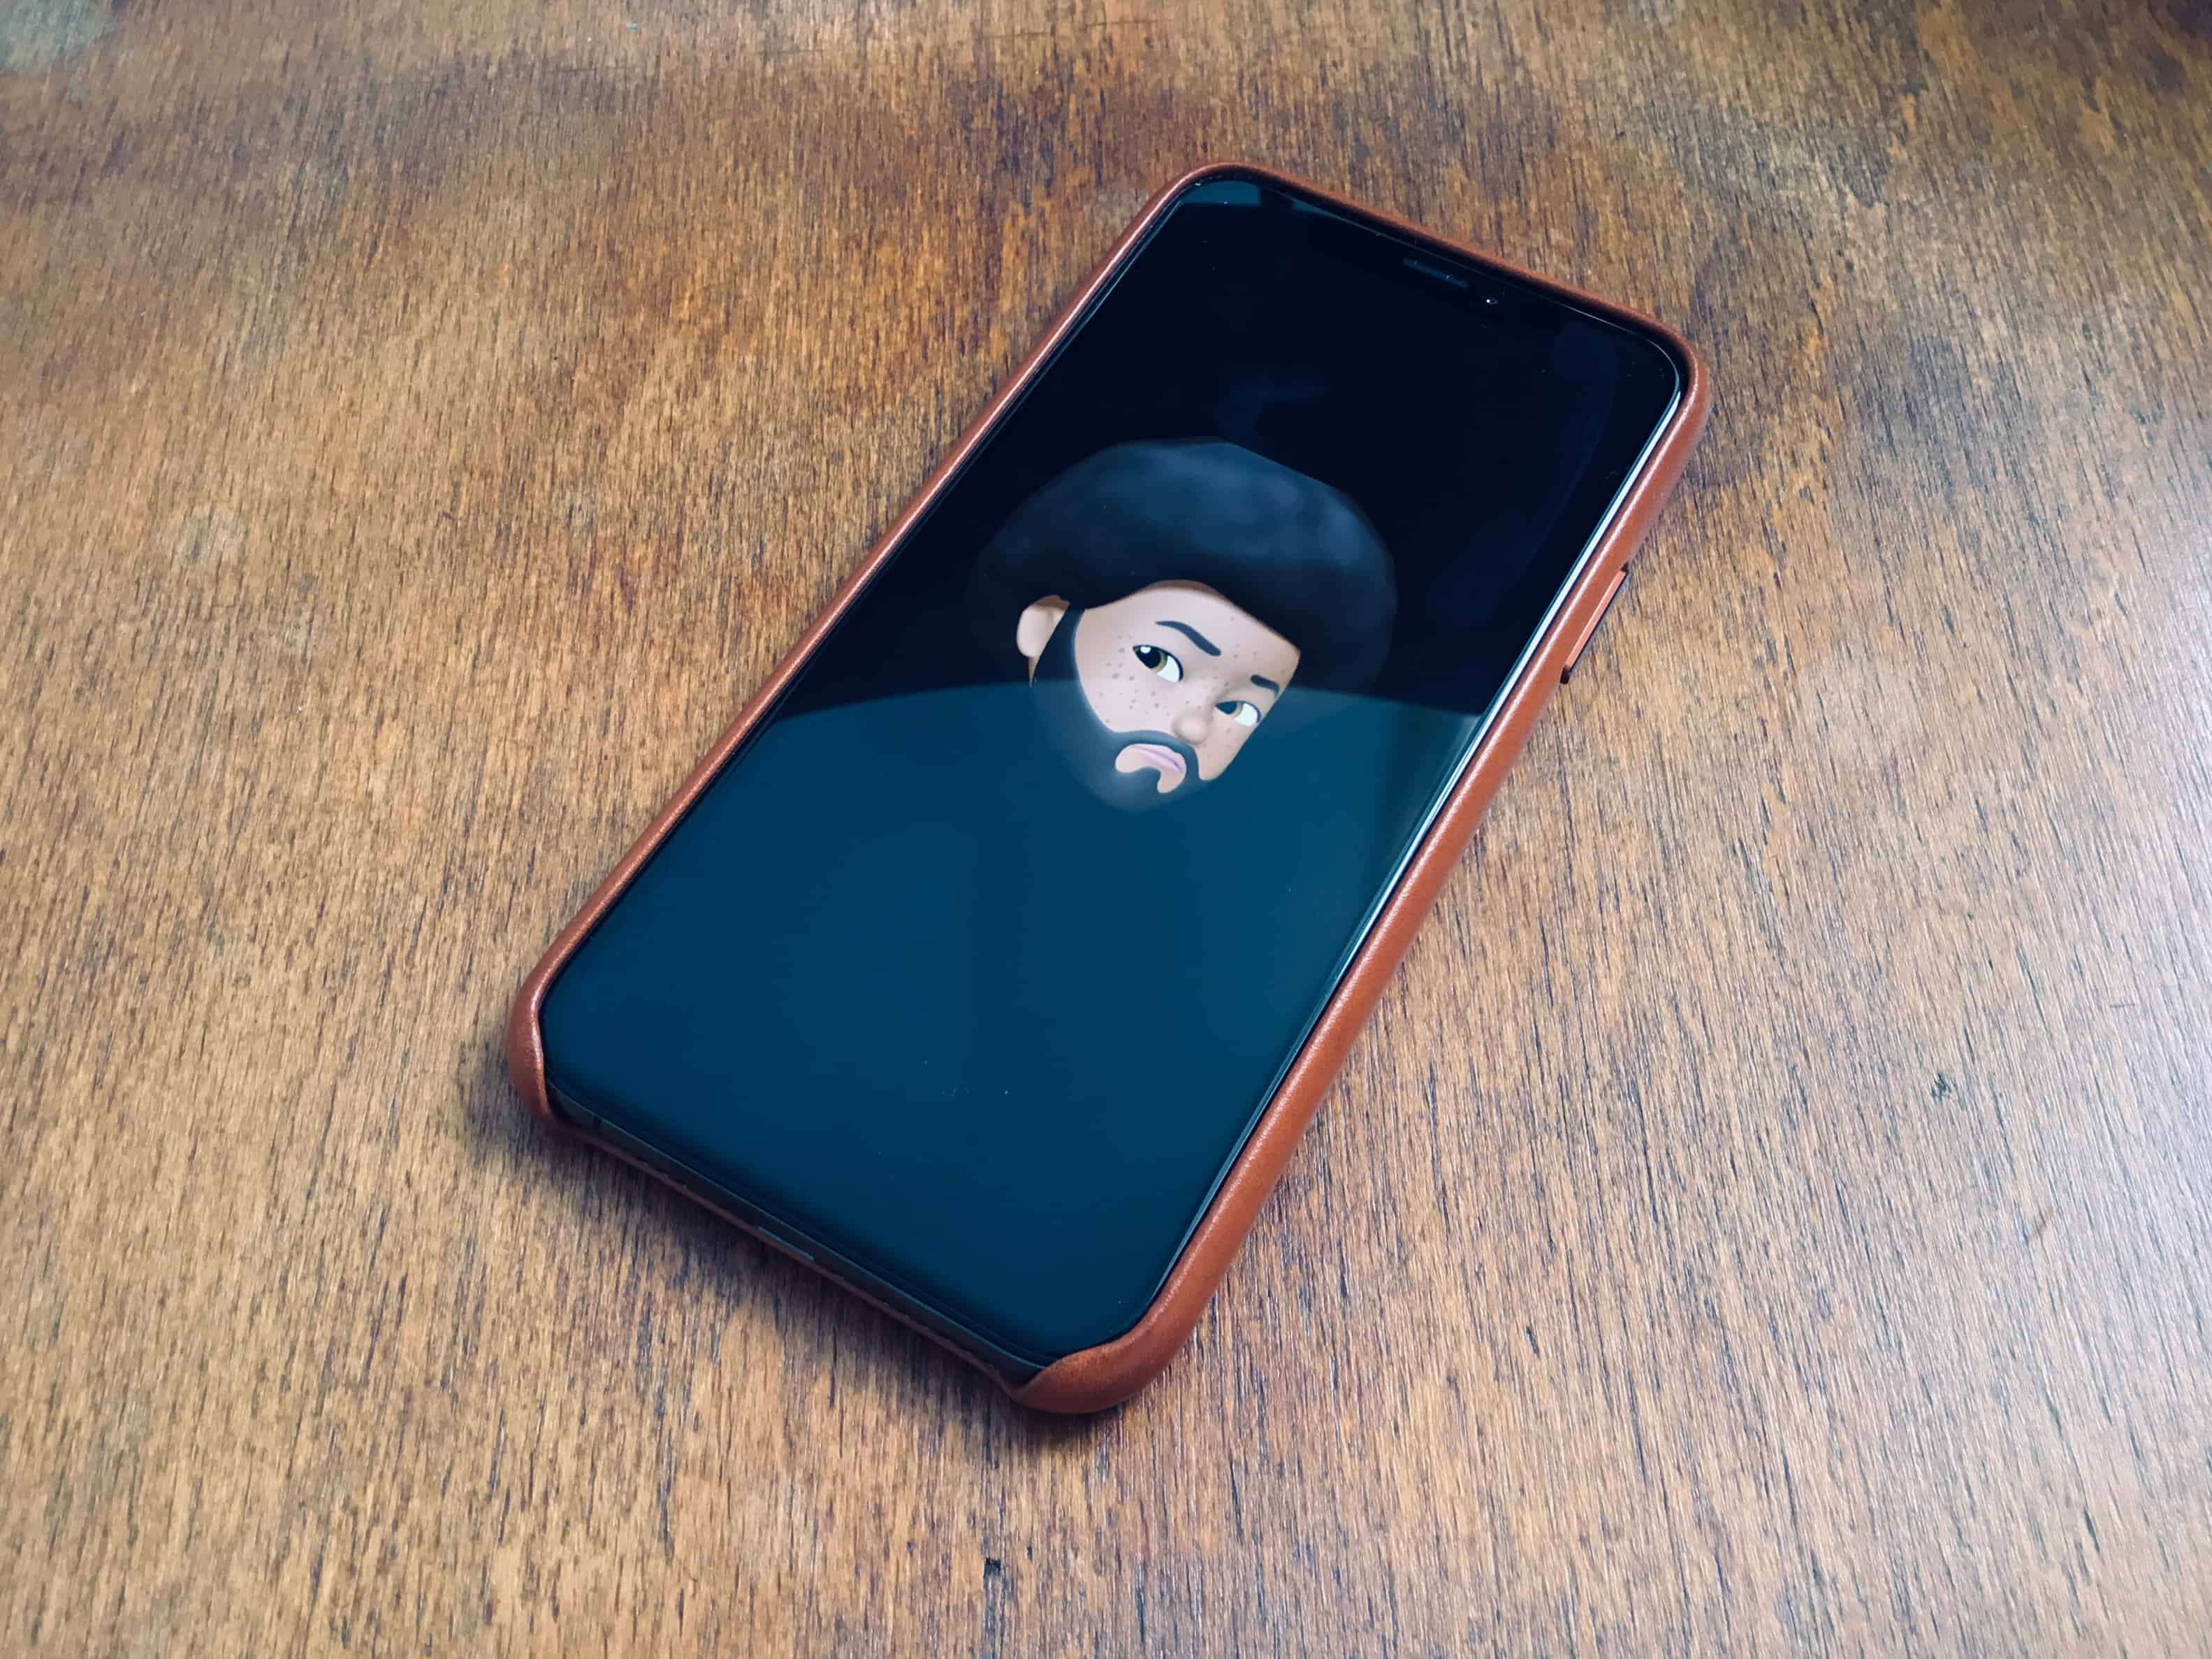 Memoji are awesome. Here's how to make your own.